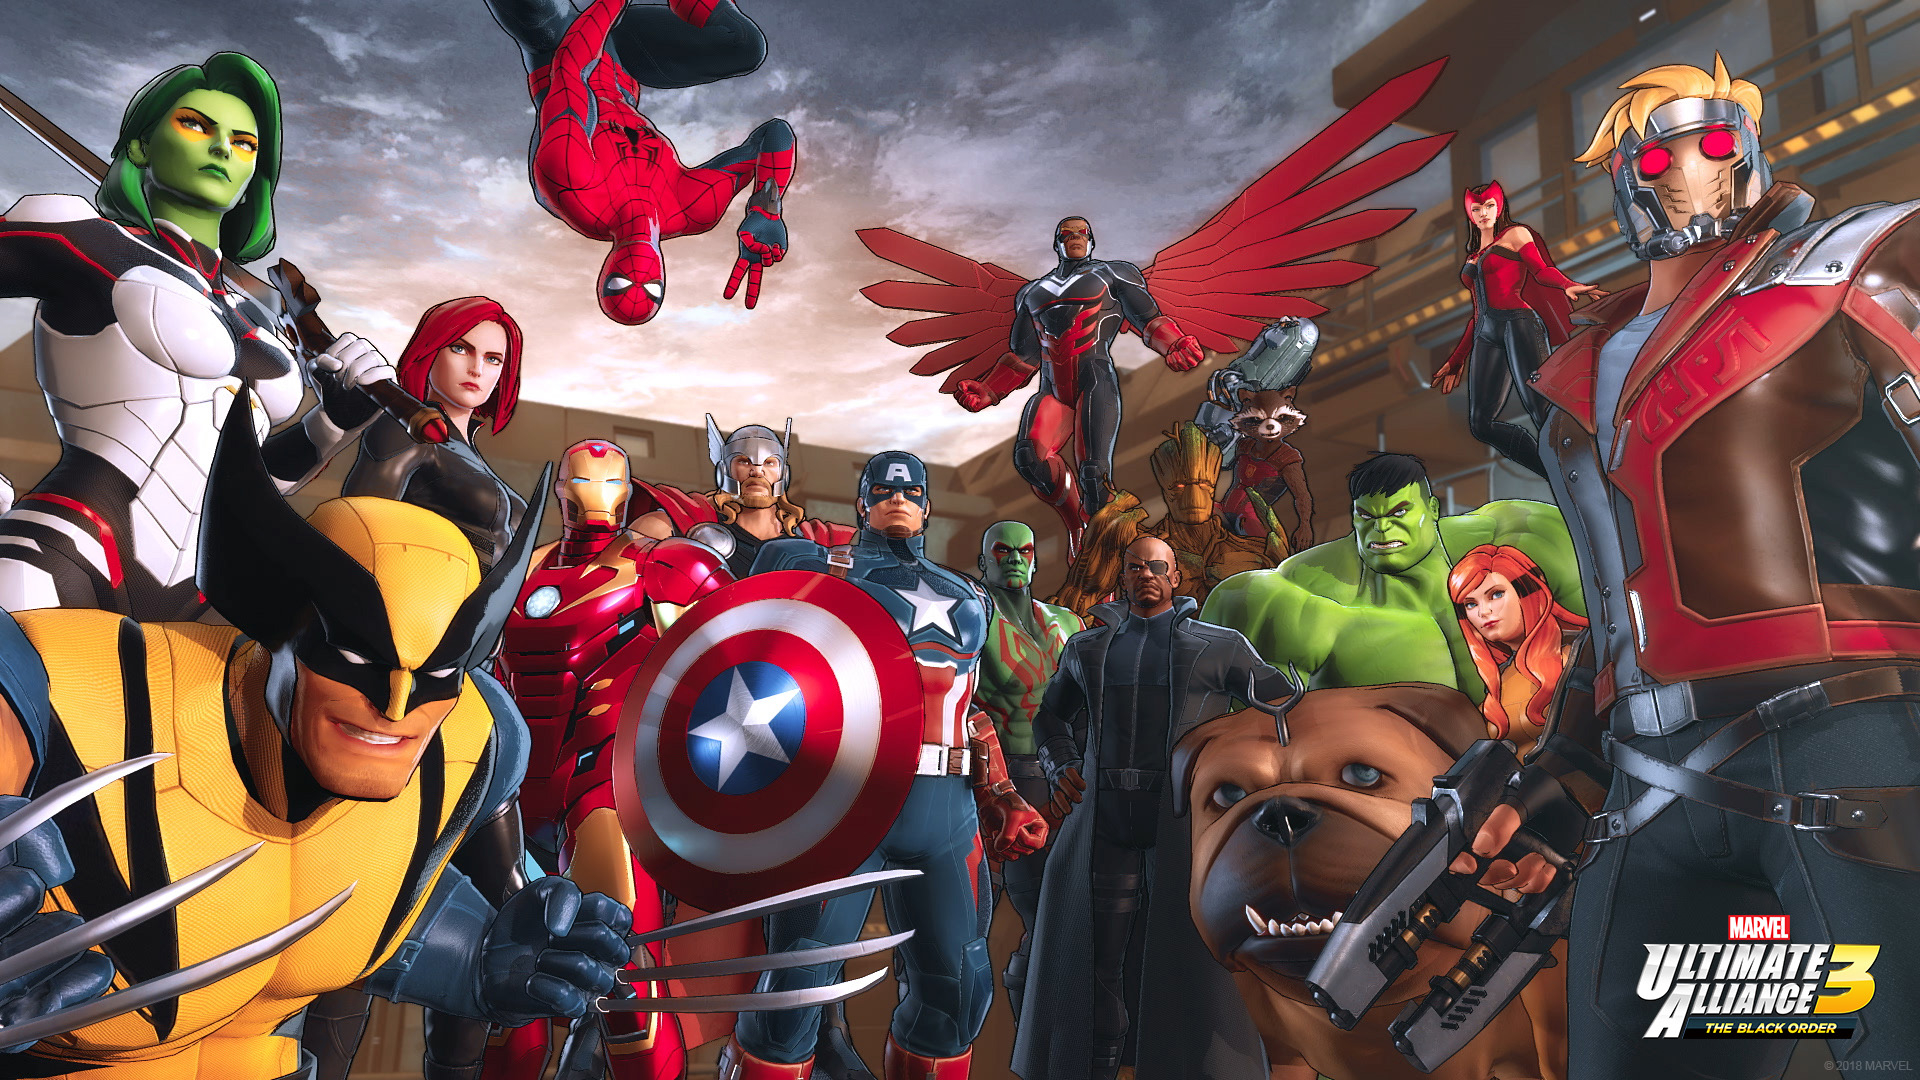 A group of Marvel superheroes